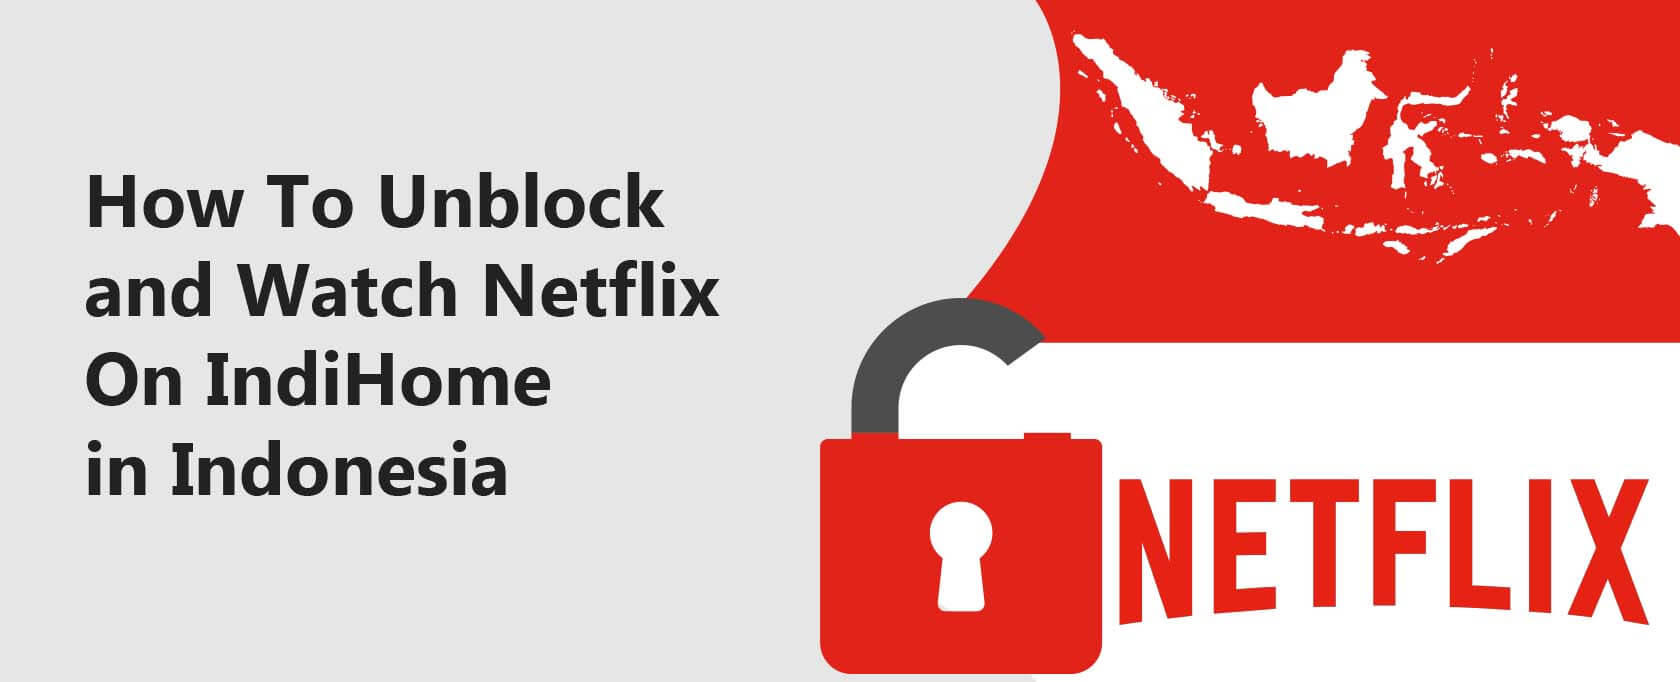 How To Unblock and Watch Netflix On IndiHome in Indonesia